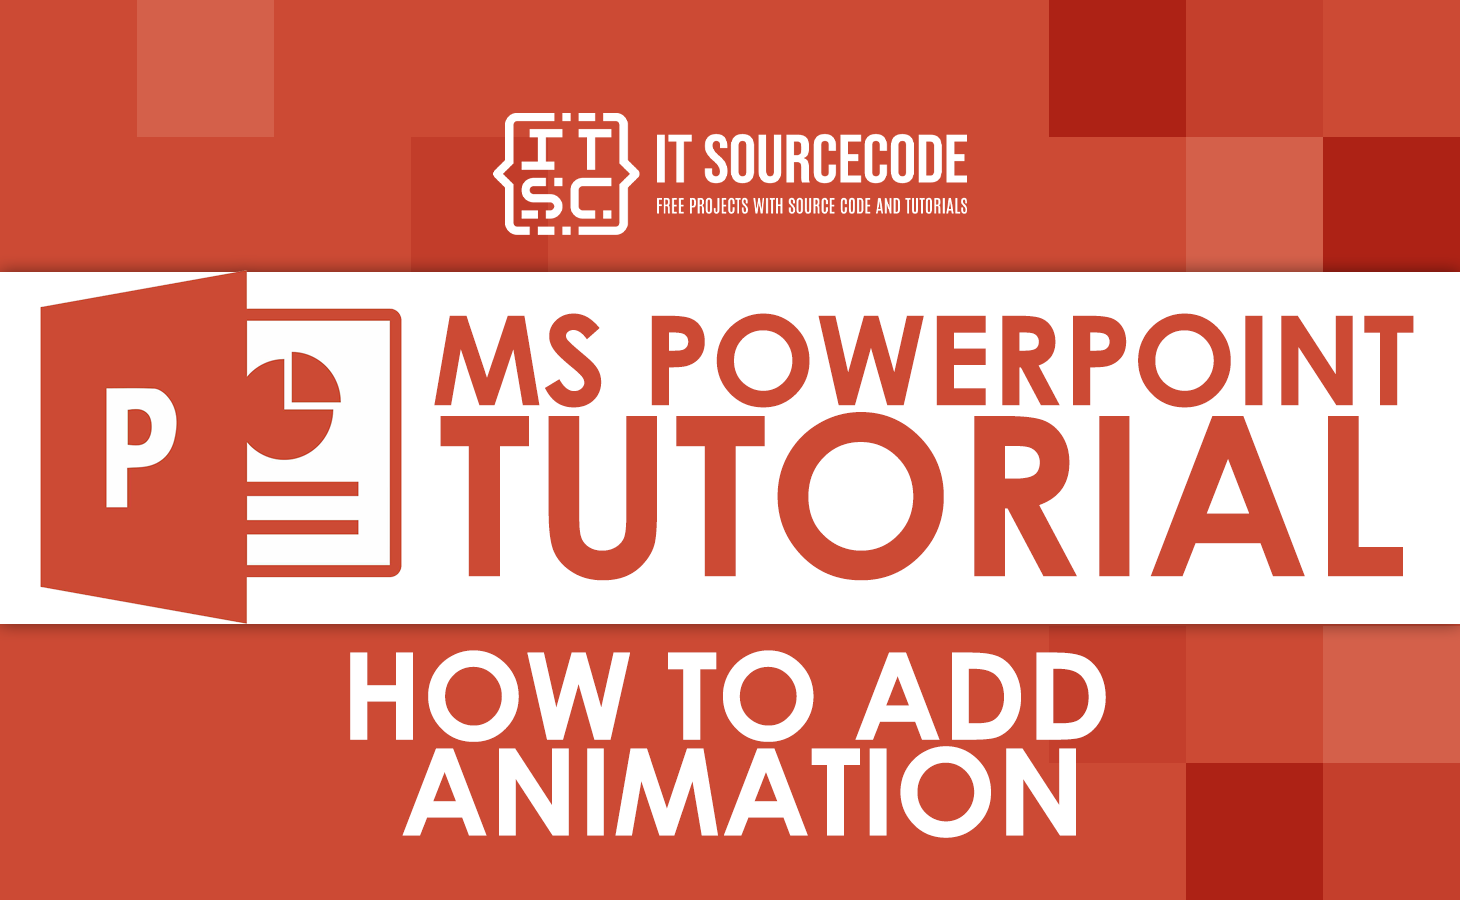 How To Add Animation To PowerPoint Step-by-Step Guide